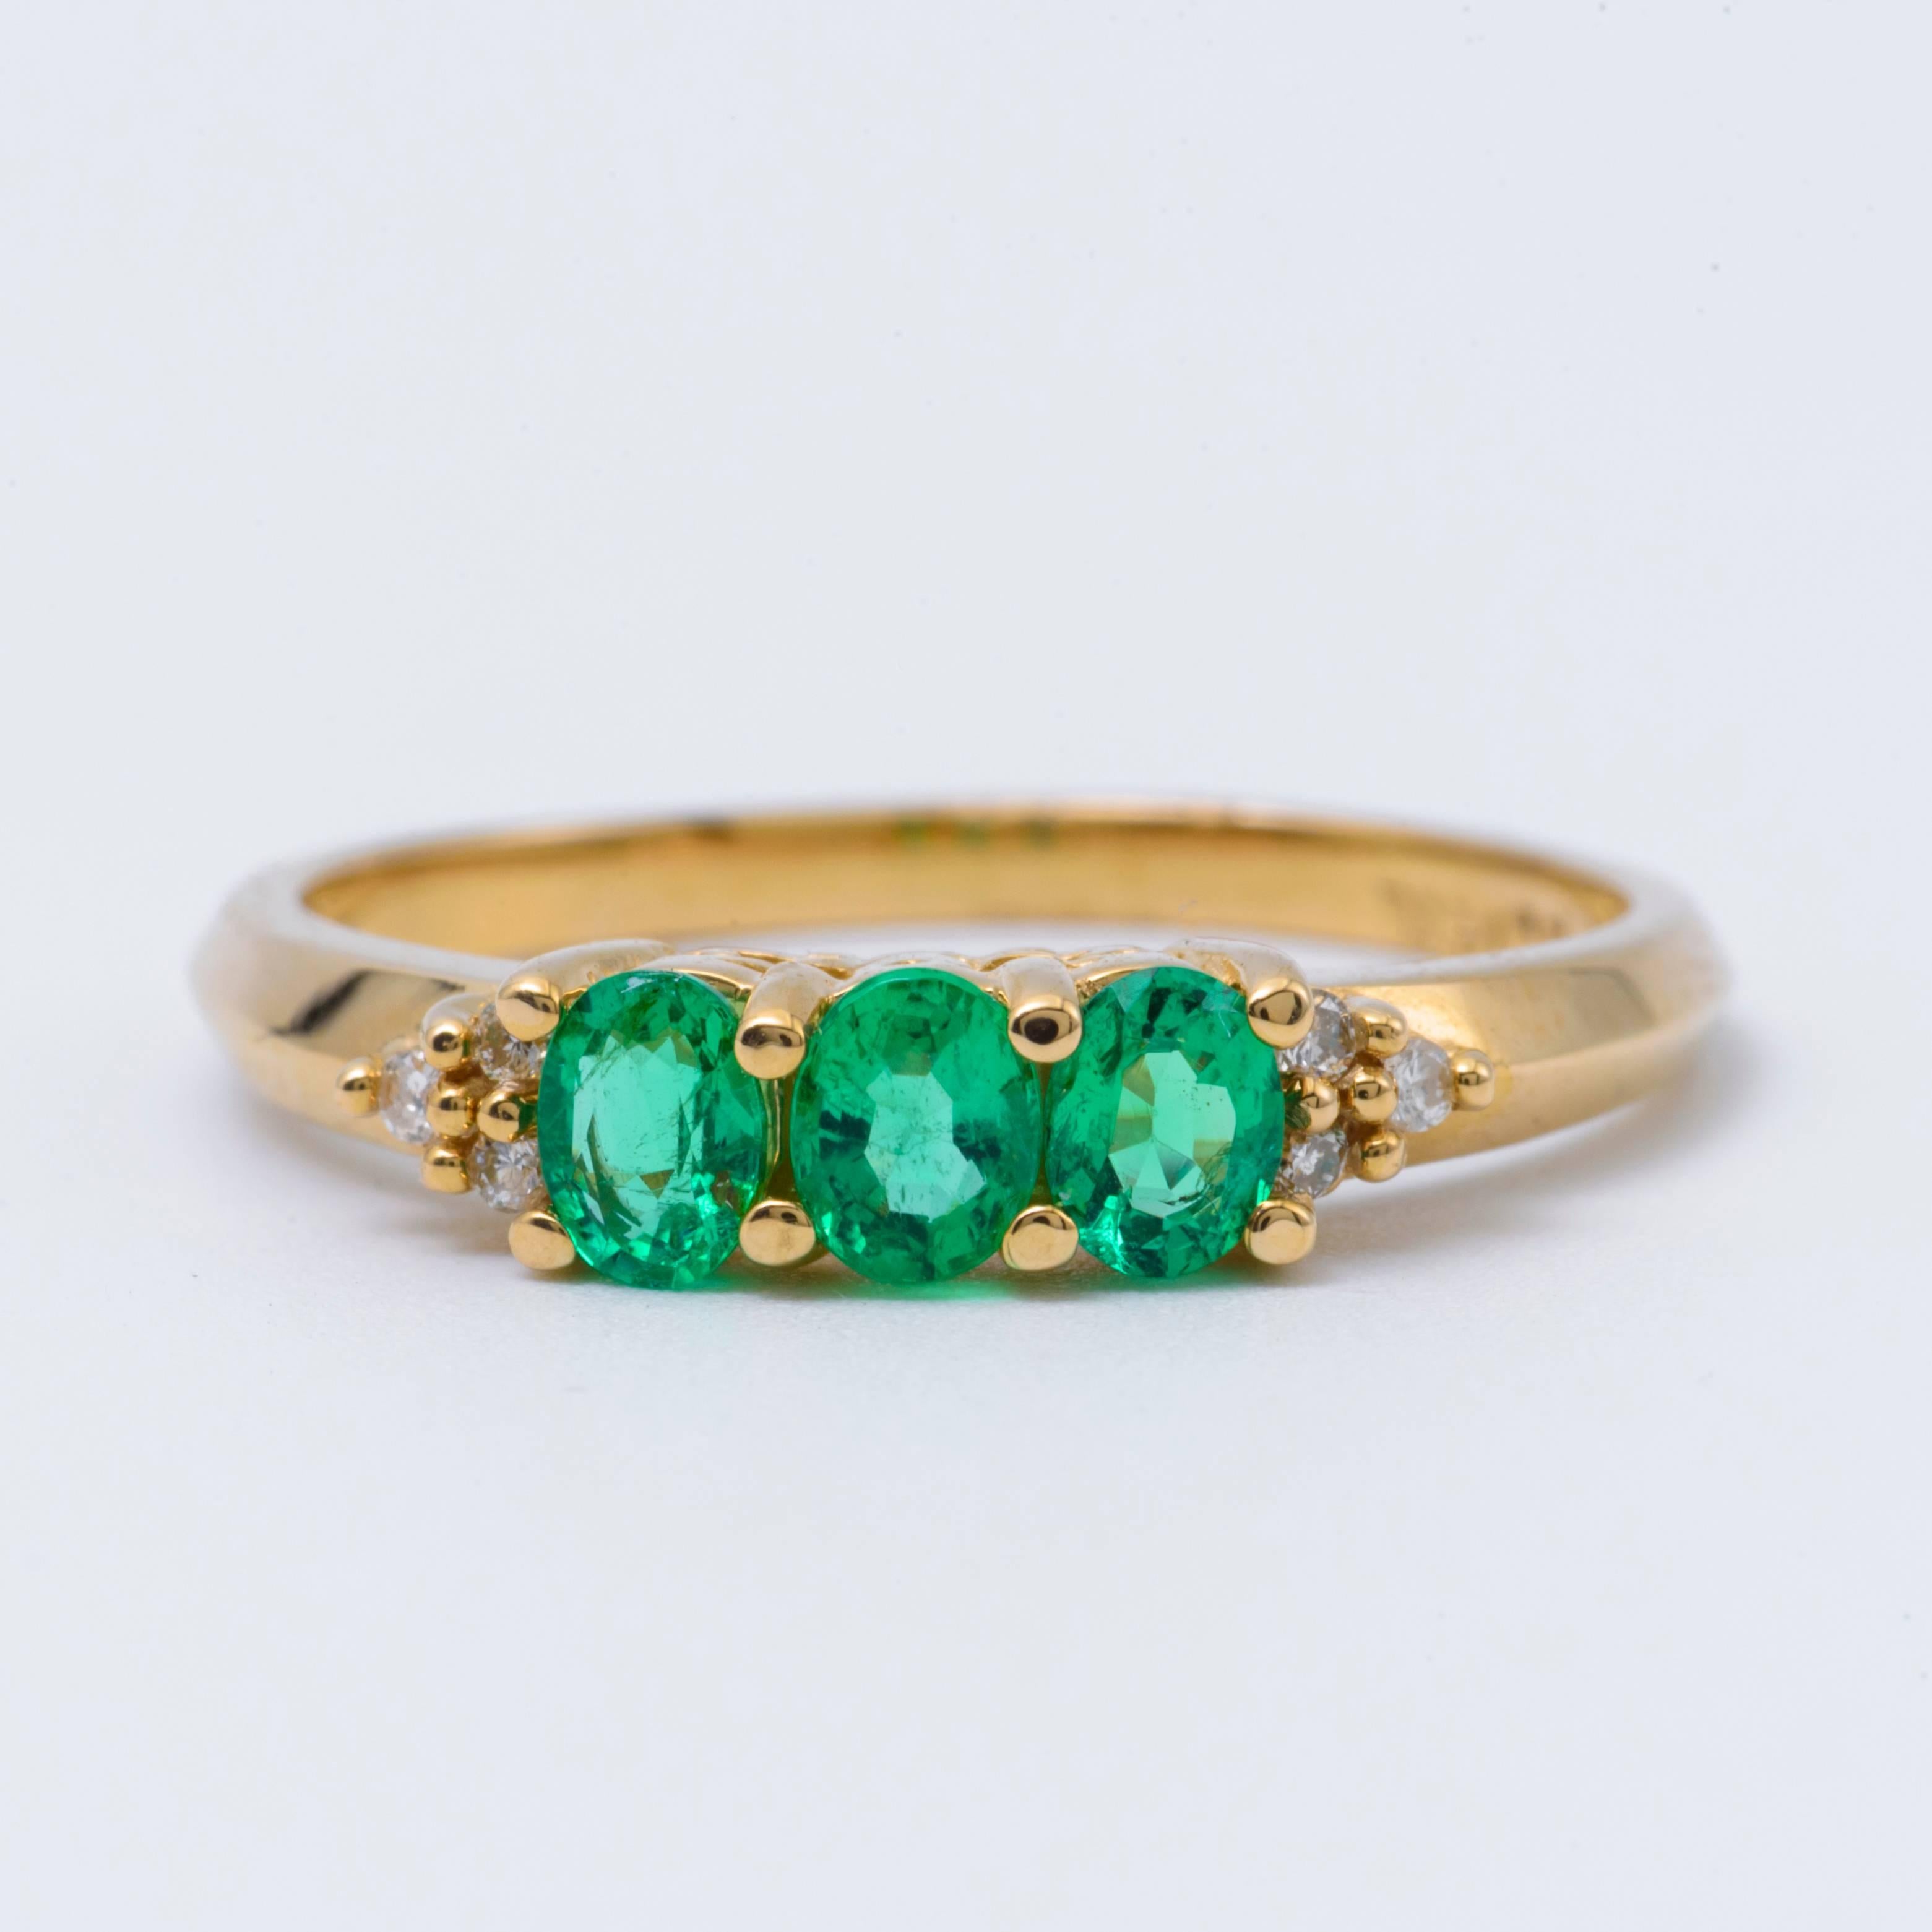 14 K Yellow Gold with Three Stone  Emeralds each one measuring 5x3 mm
for a total weight of 0.63 cts.
The Diamonds weight is 0.05 cts.